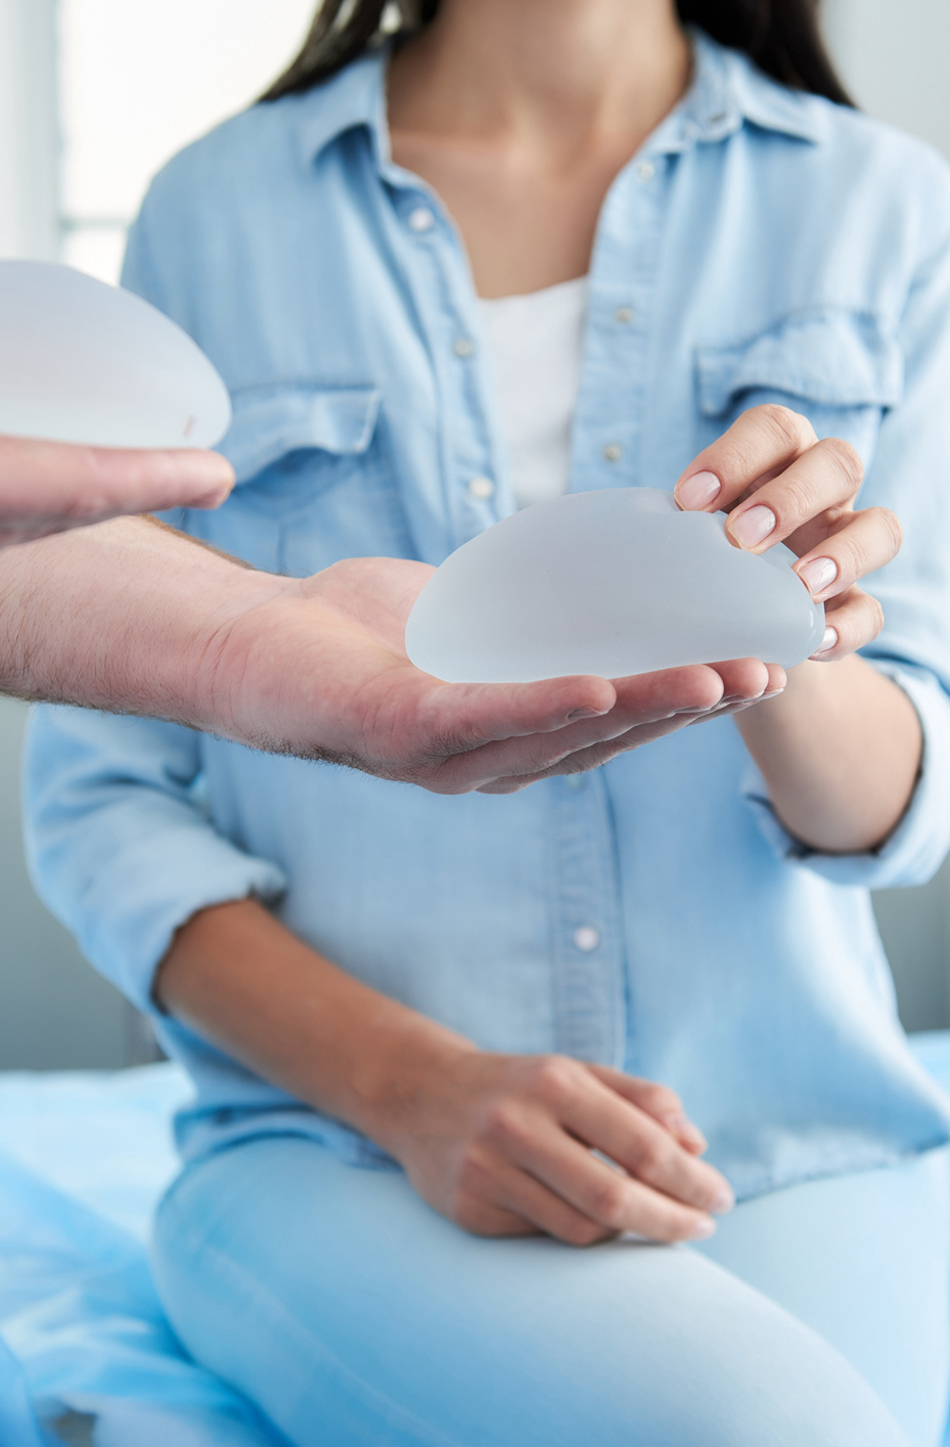 What New FDA Guidelines for Breast Implants Mean for You